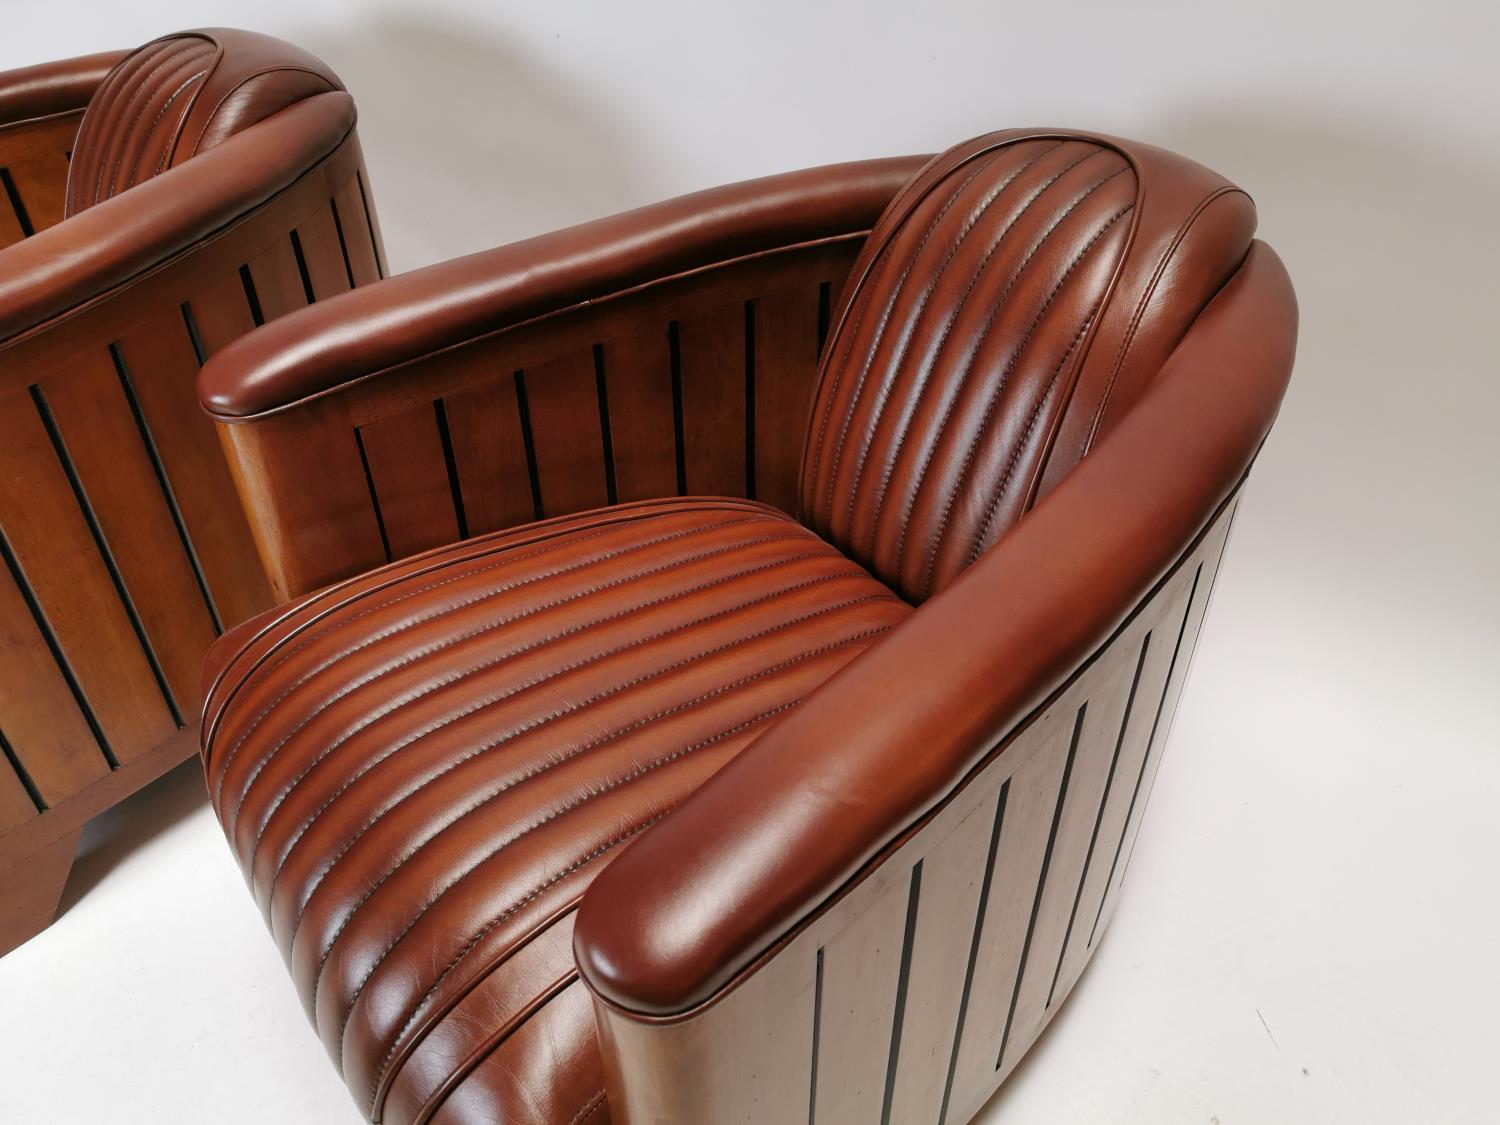 Pair of exceptional quality Art Deco style leather upholstered and wood Aviator club chairs {72 cm H - Image 3 of 4